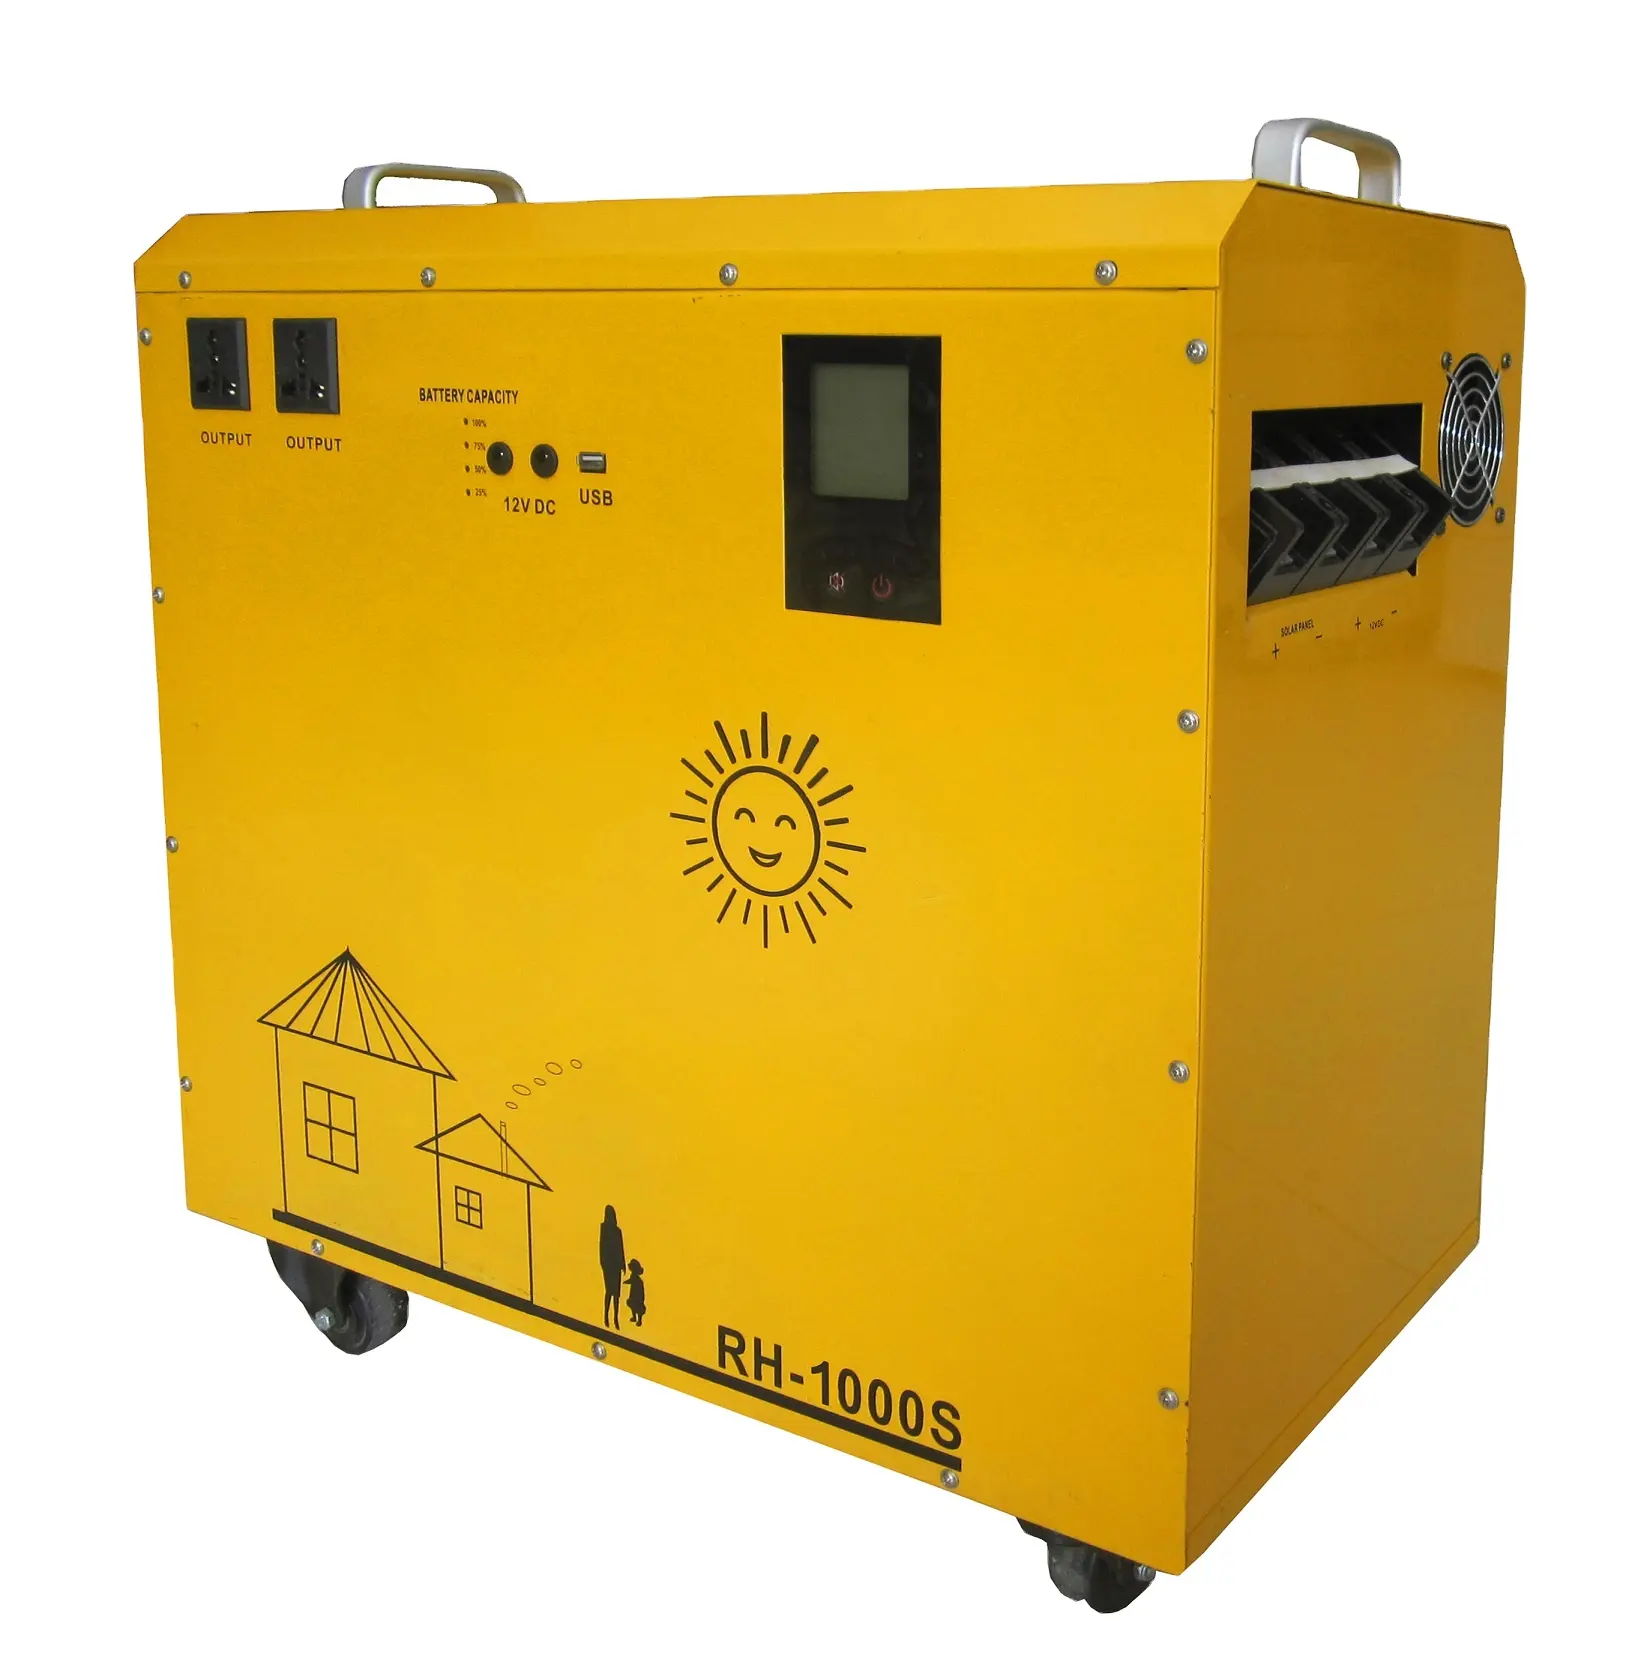 Complete Hybrid Off Grid Solar Power System 5kw solar portable power supply station generator power banks for Home In Africa